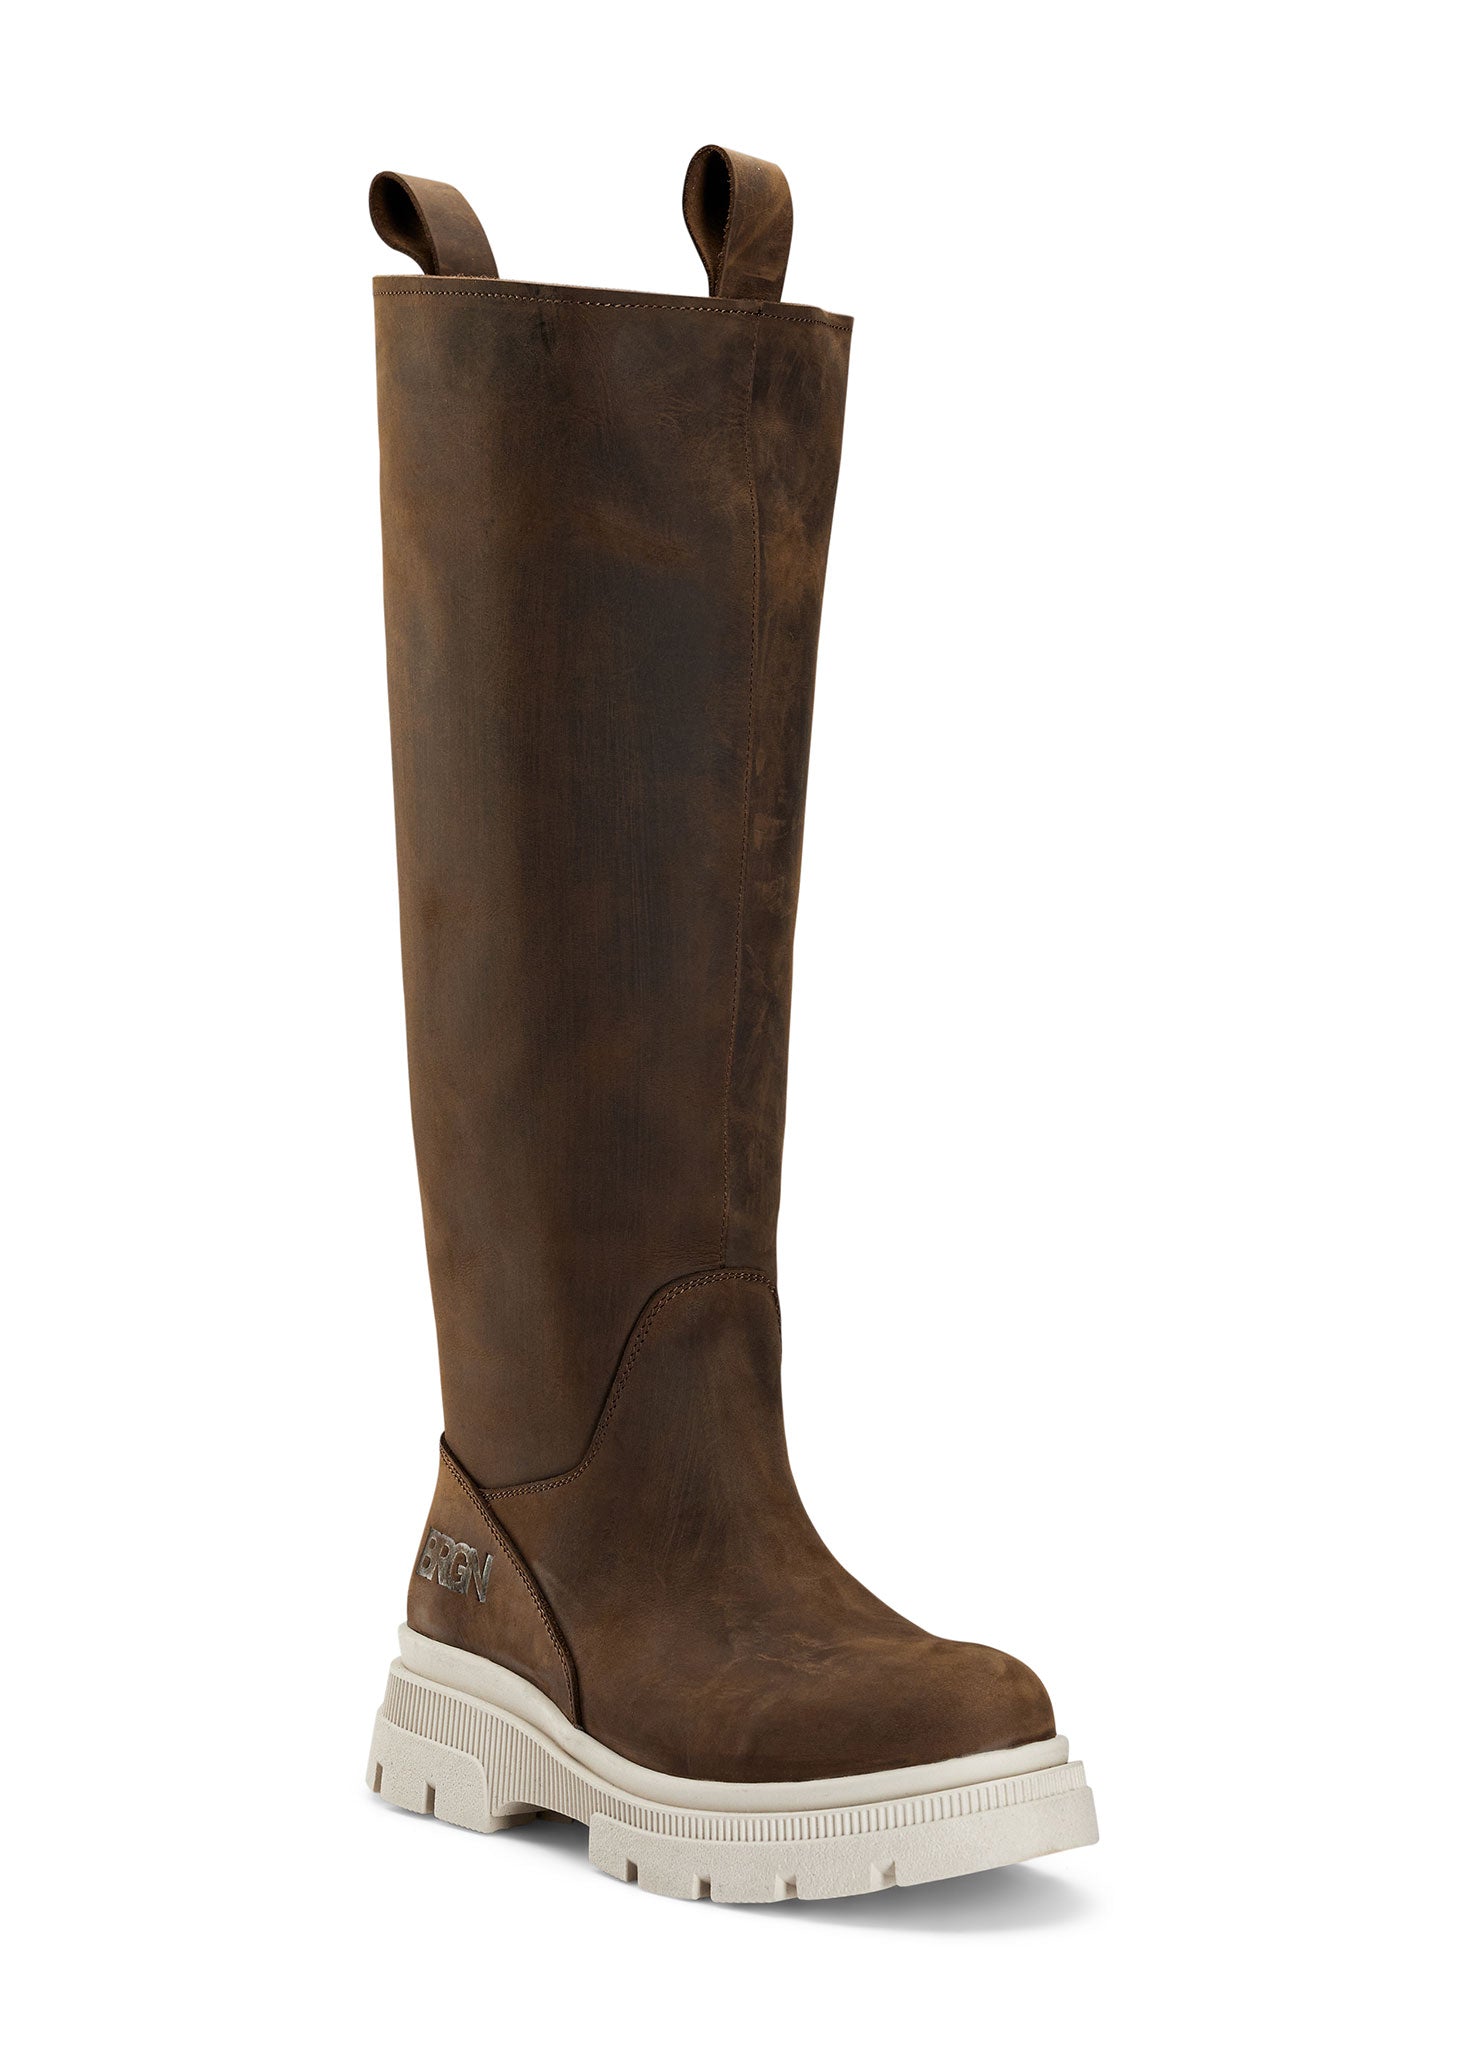 BRGN High Leather Boots Shoes 187 Chocolate Brown / 135 Sand